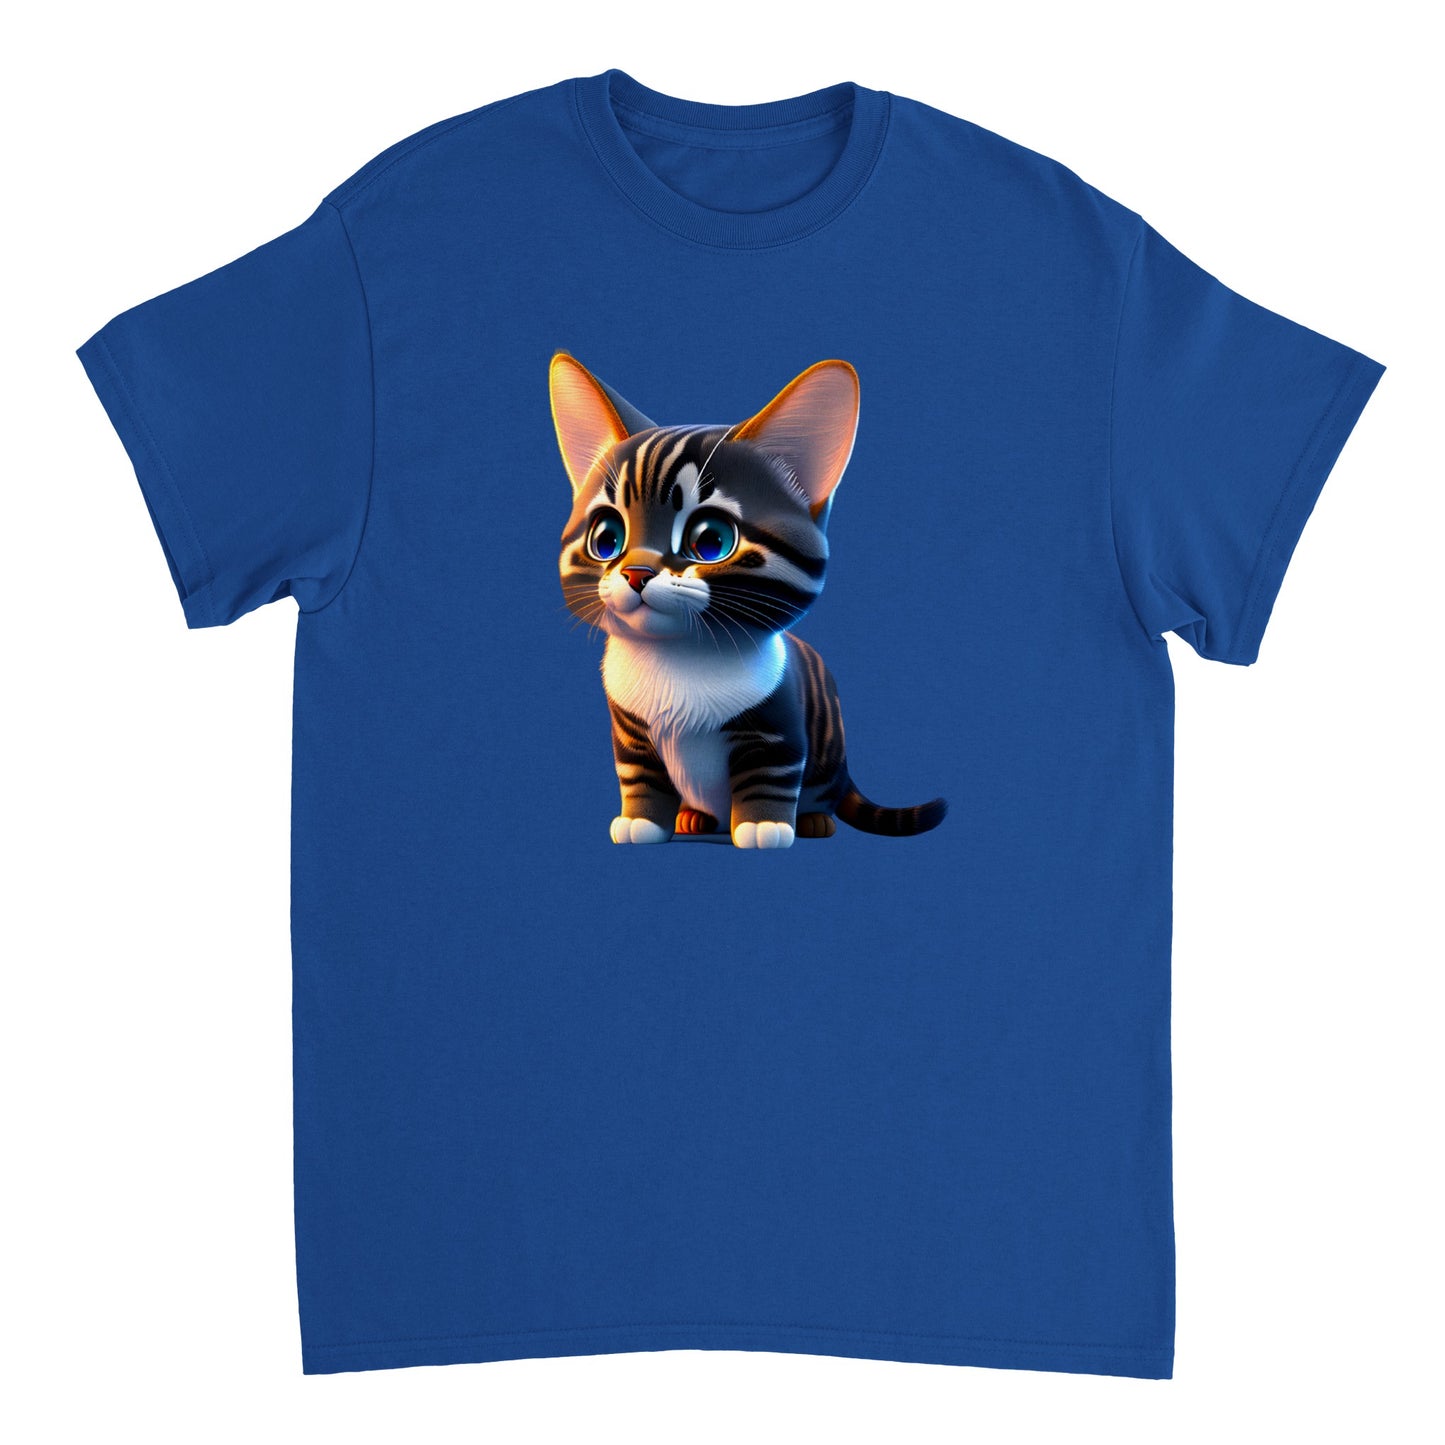 Adorable, Cool, Cute Cats and Kittens Toy - Heavyweight Unisex Crewneck T-shirt 35